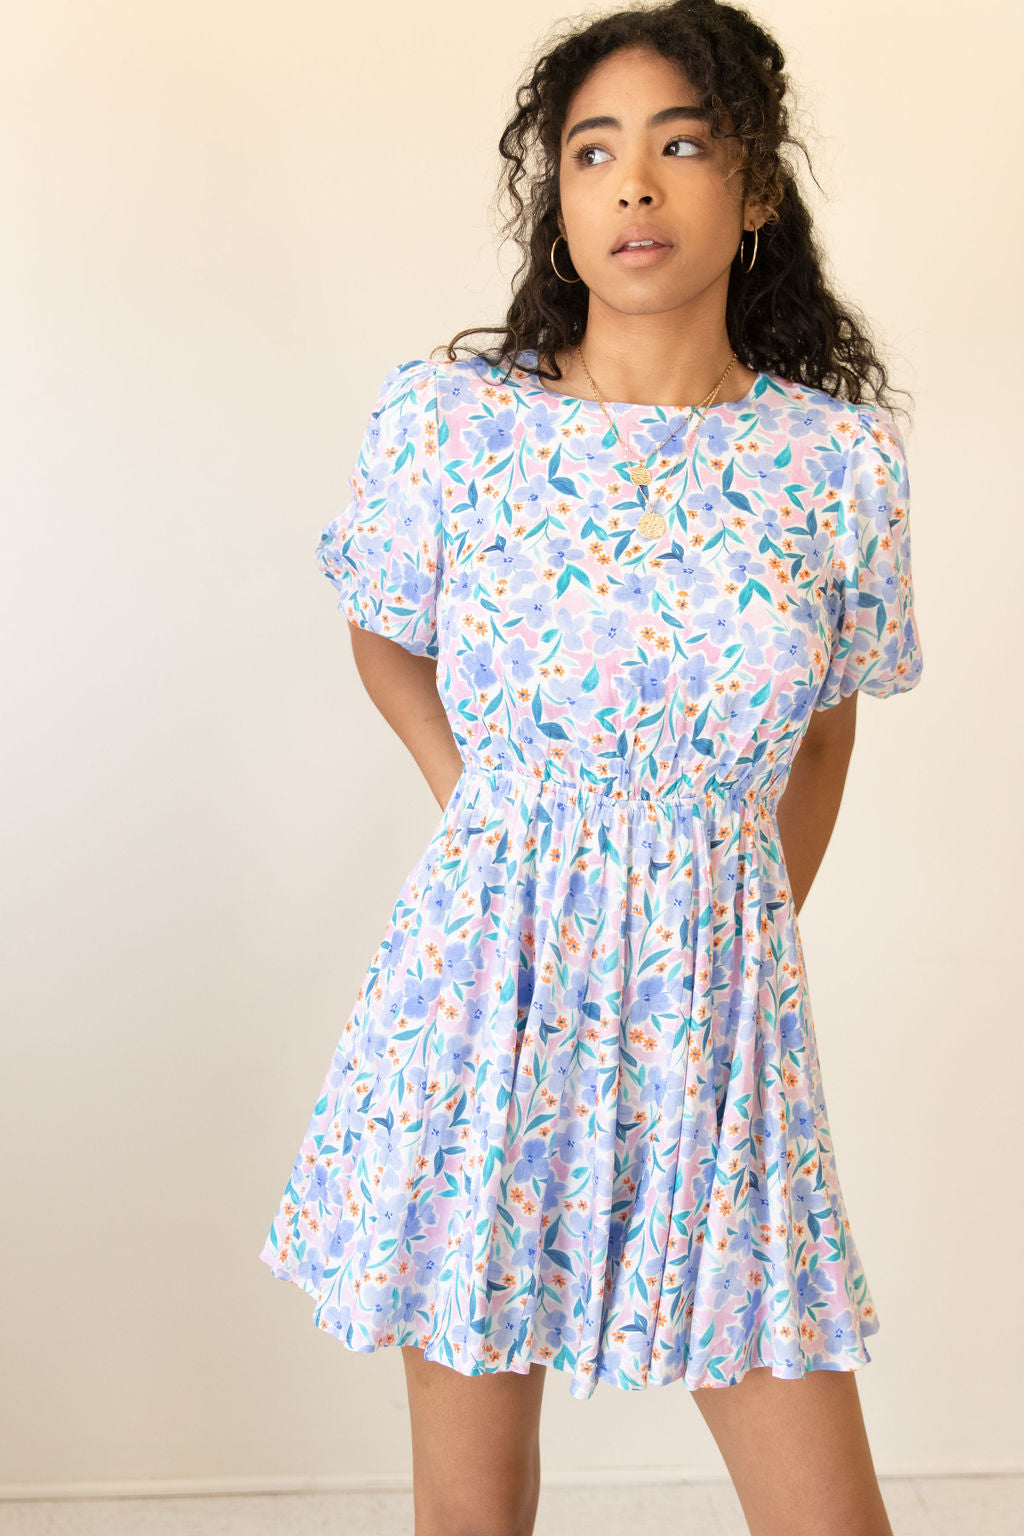 Starstruck Floral Dress by For Good